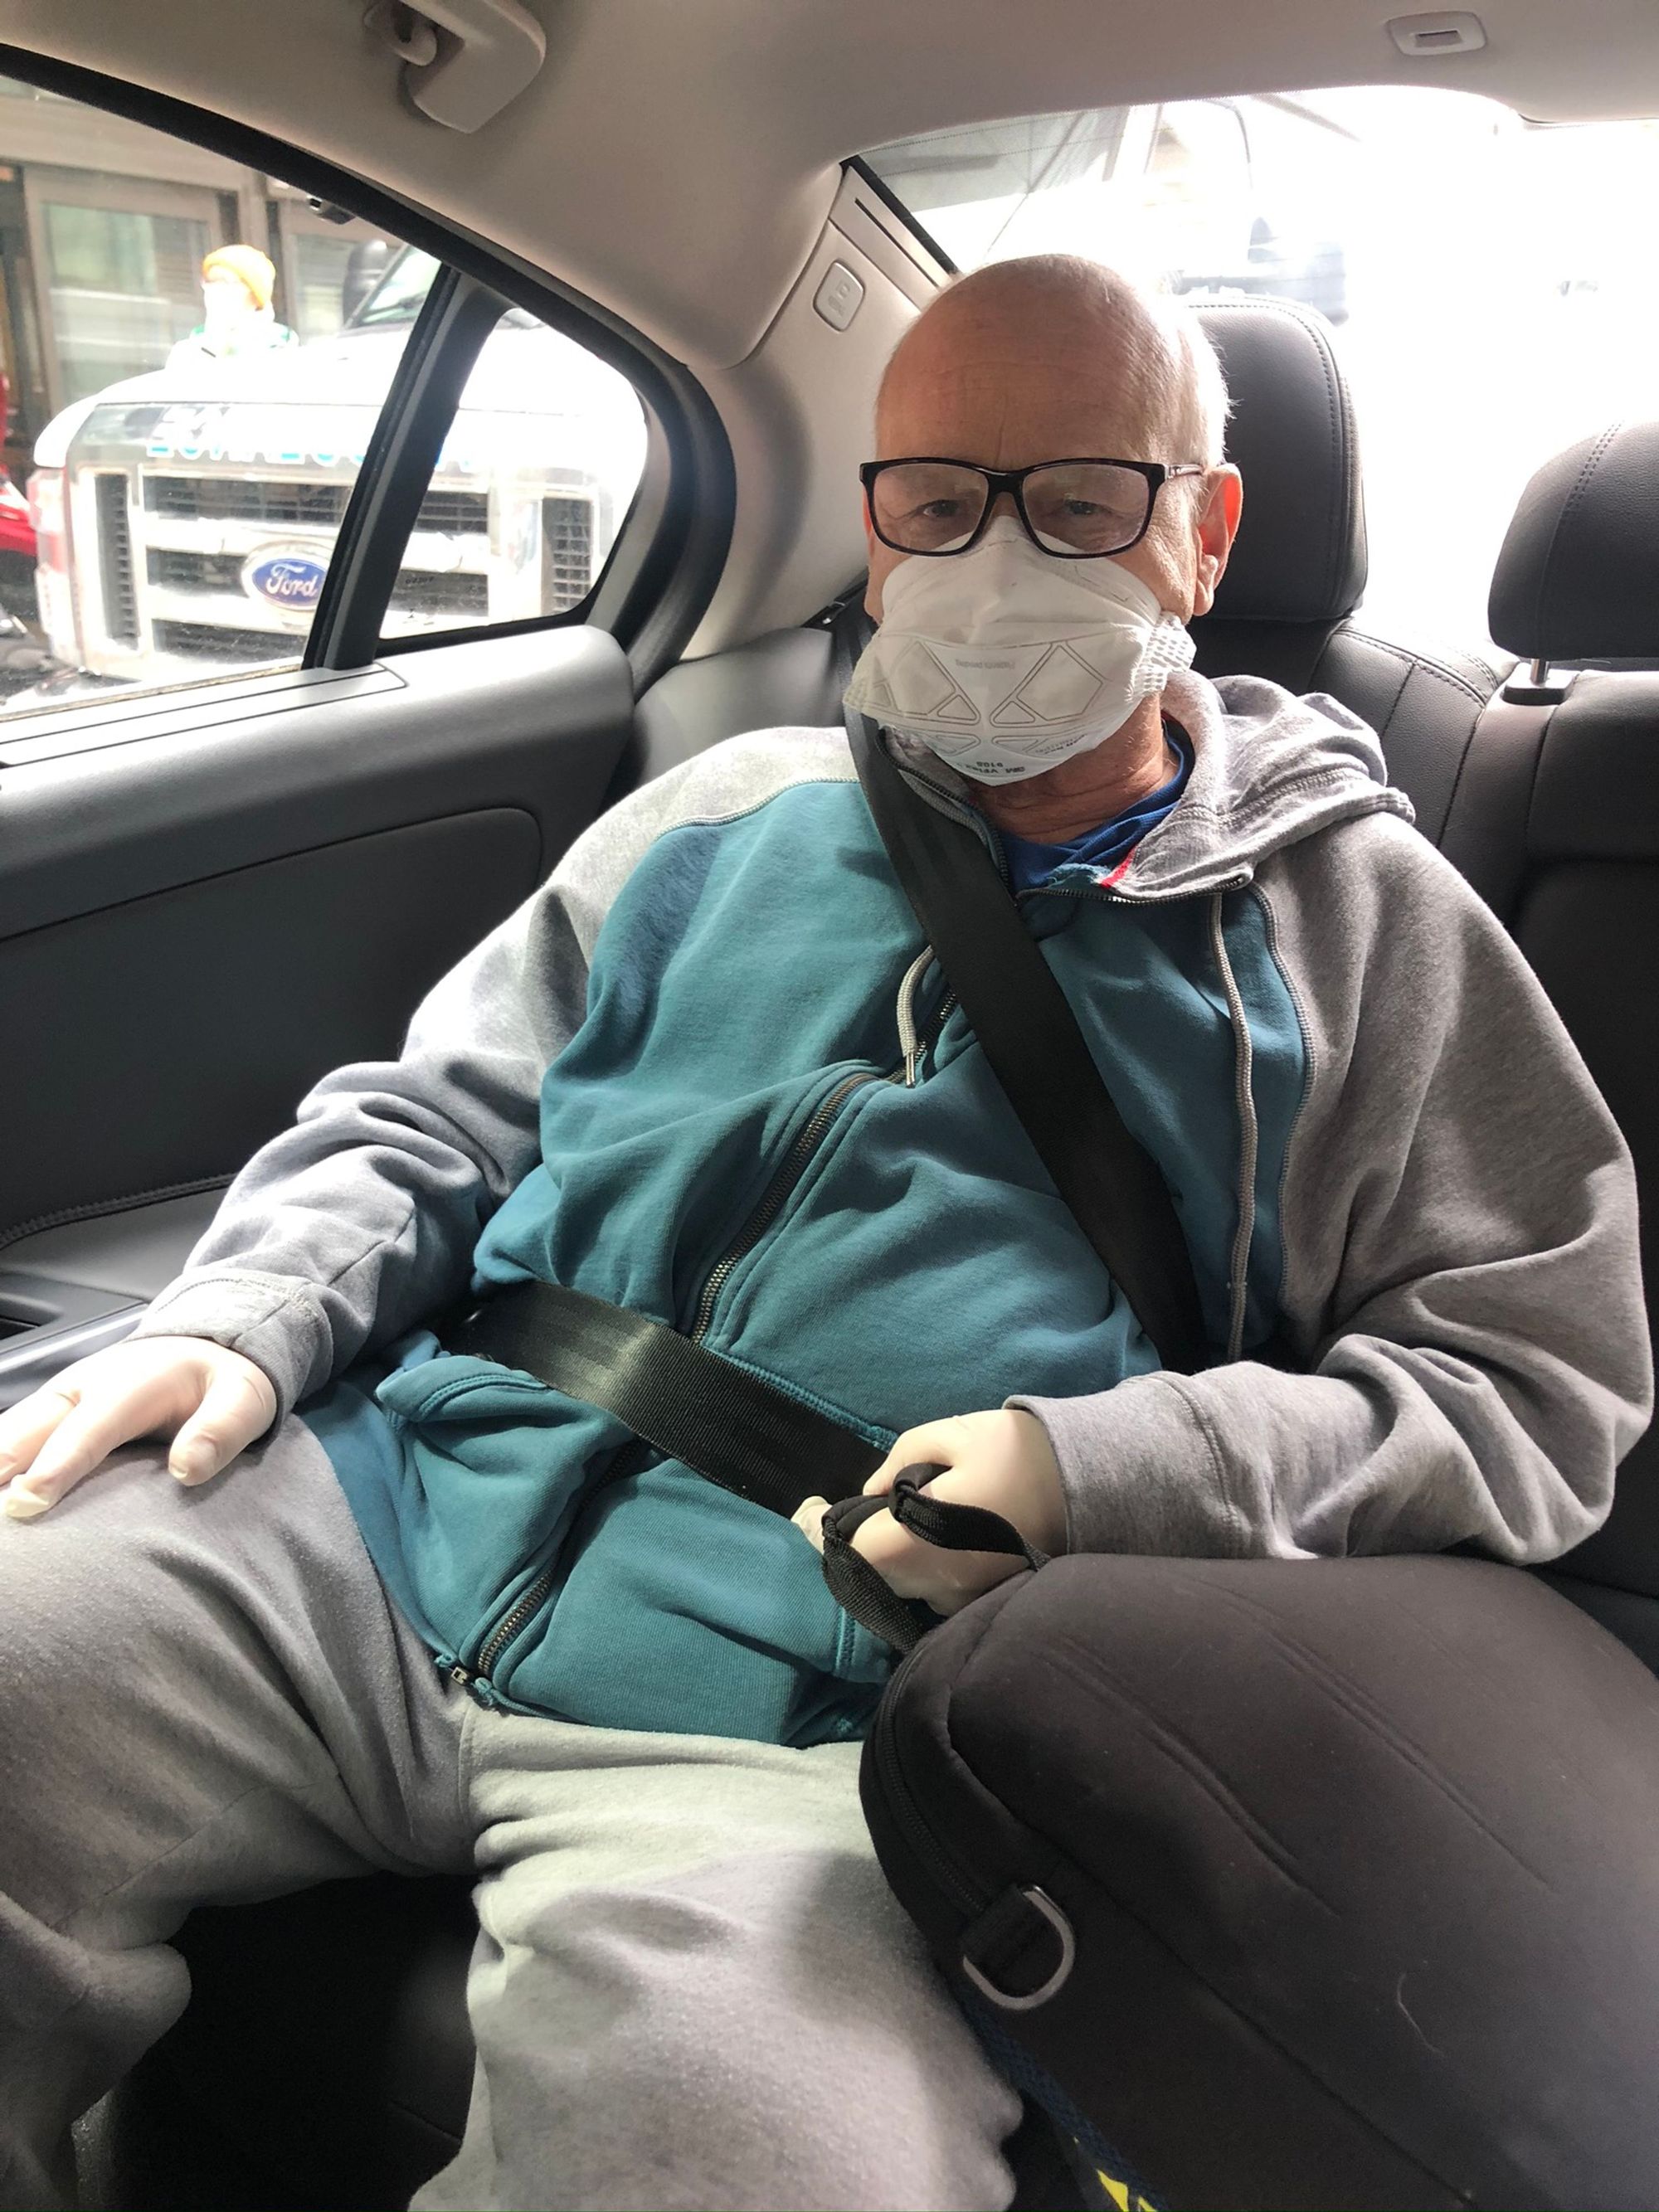 "I brought my dad to his first chemo infusion after the pandemic began at Dana-Farber Cancer Institute. They wouldn’t let me be with him for the appointment. He’s in his final days now. He’ll still be here when your article posts, but I don’t know how much longer." — Alex Goldstein